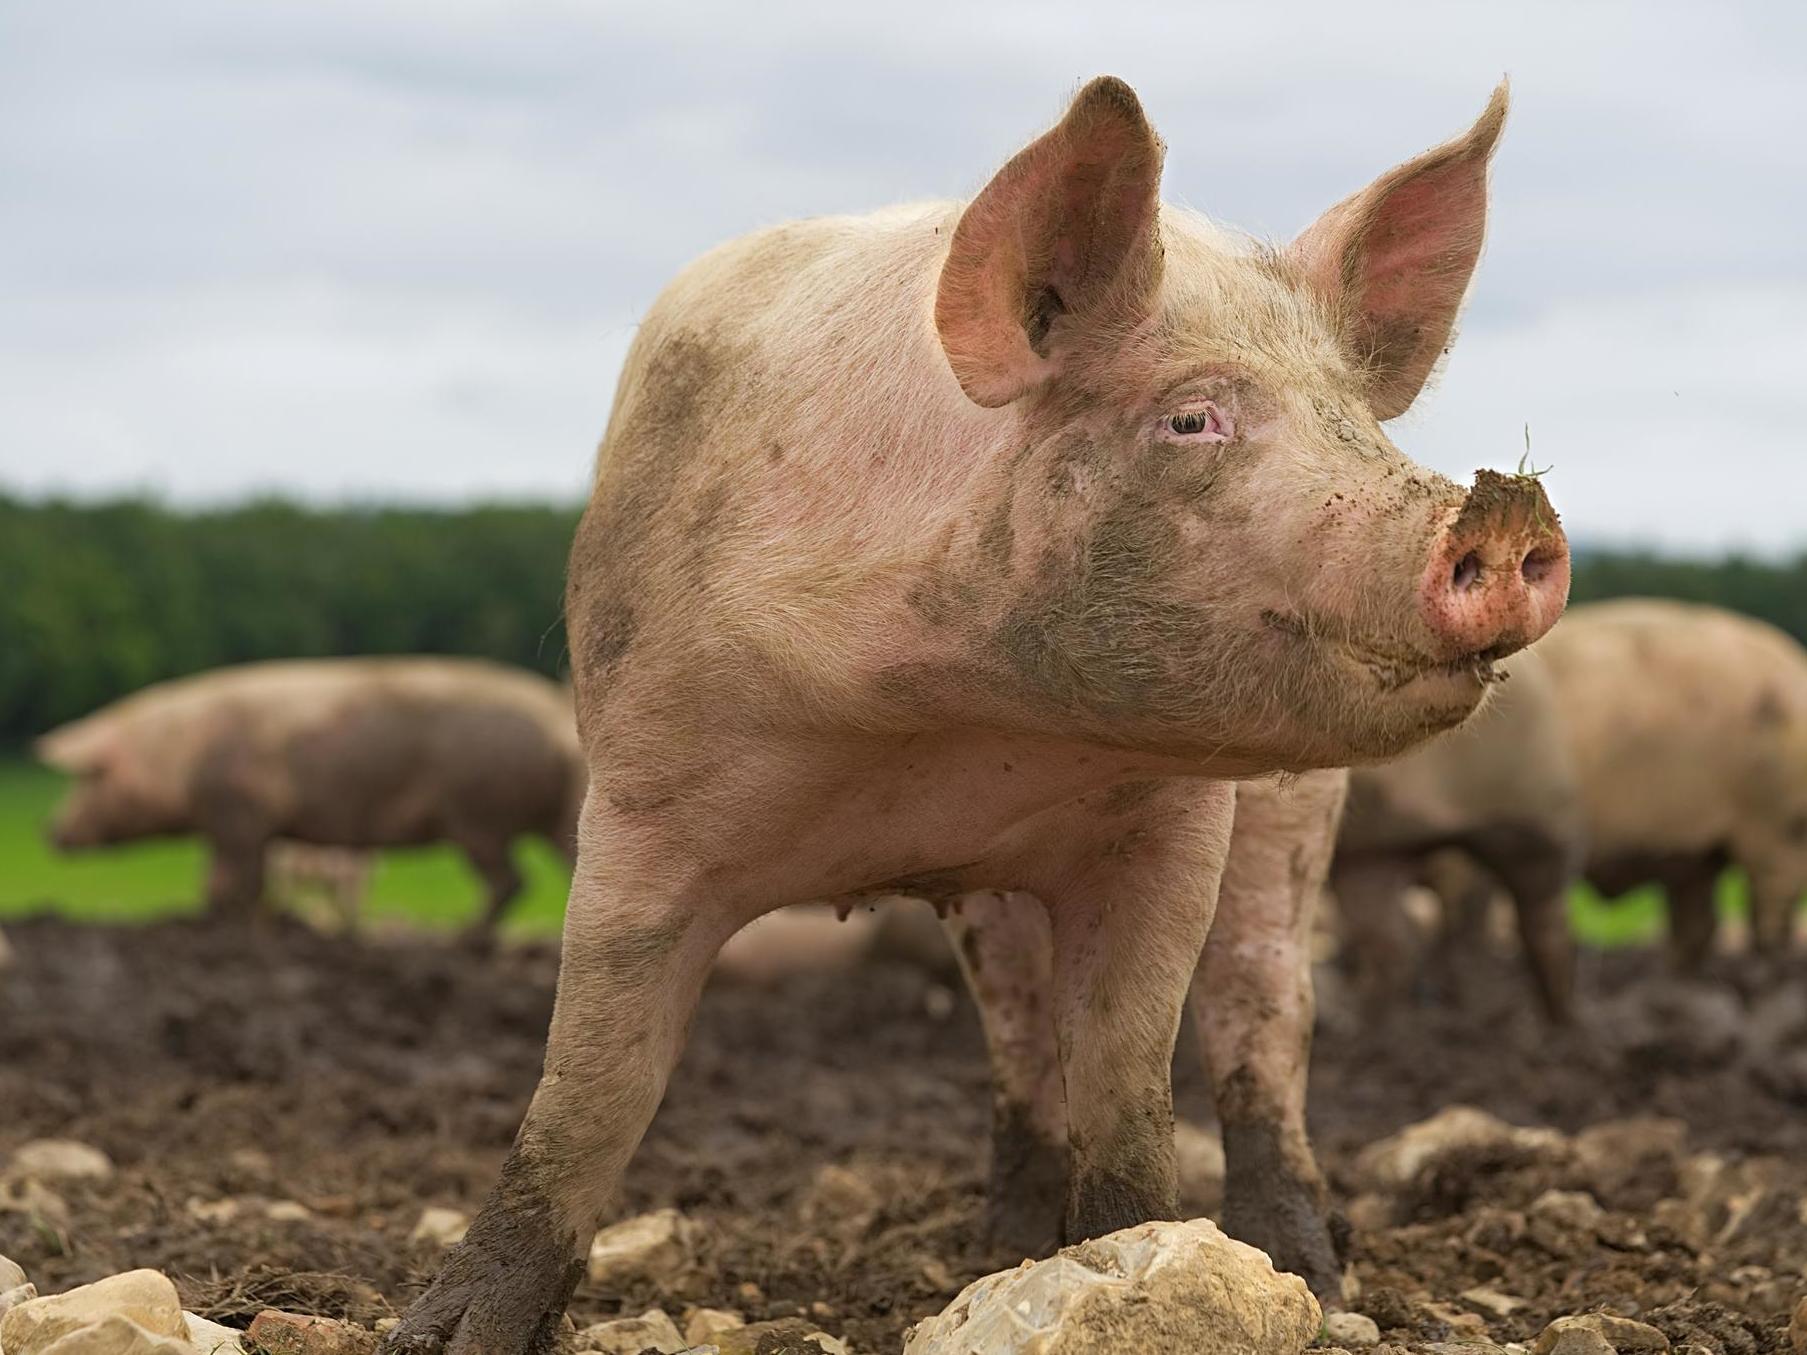 As pigs' heart anatomy is similar to that of humans, the animals have been used as models for developing new treatments